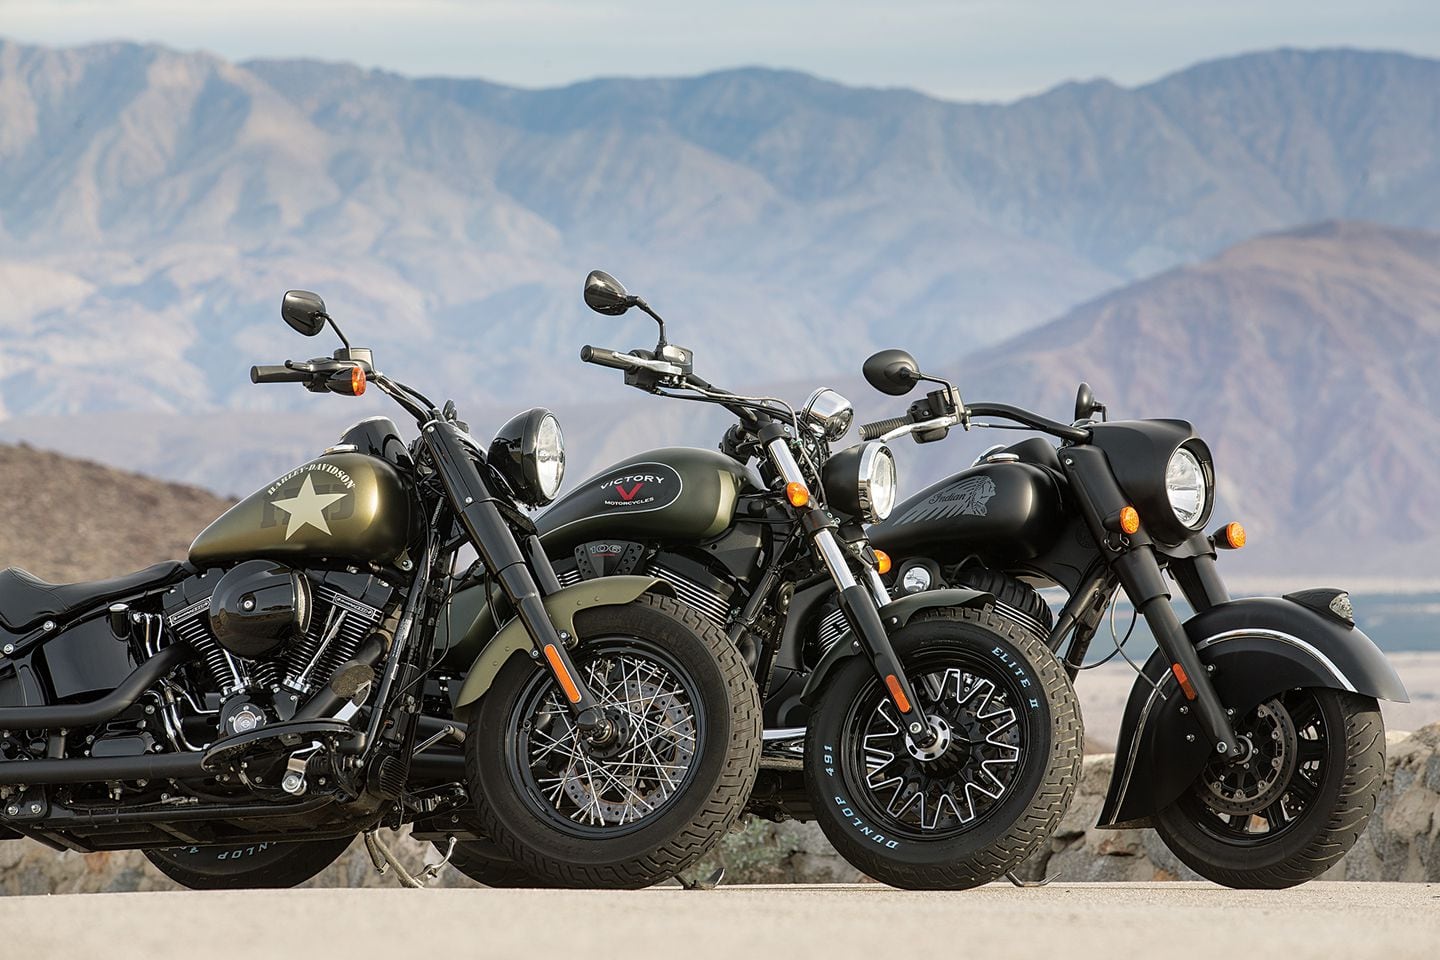 Harley Softail Slim S Vs Indian Chief Vs Victory Gunner Comparison Test Cycle World